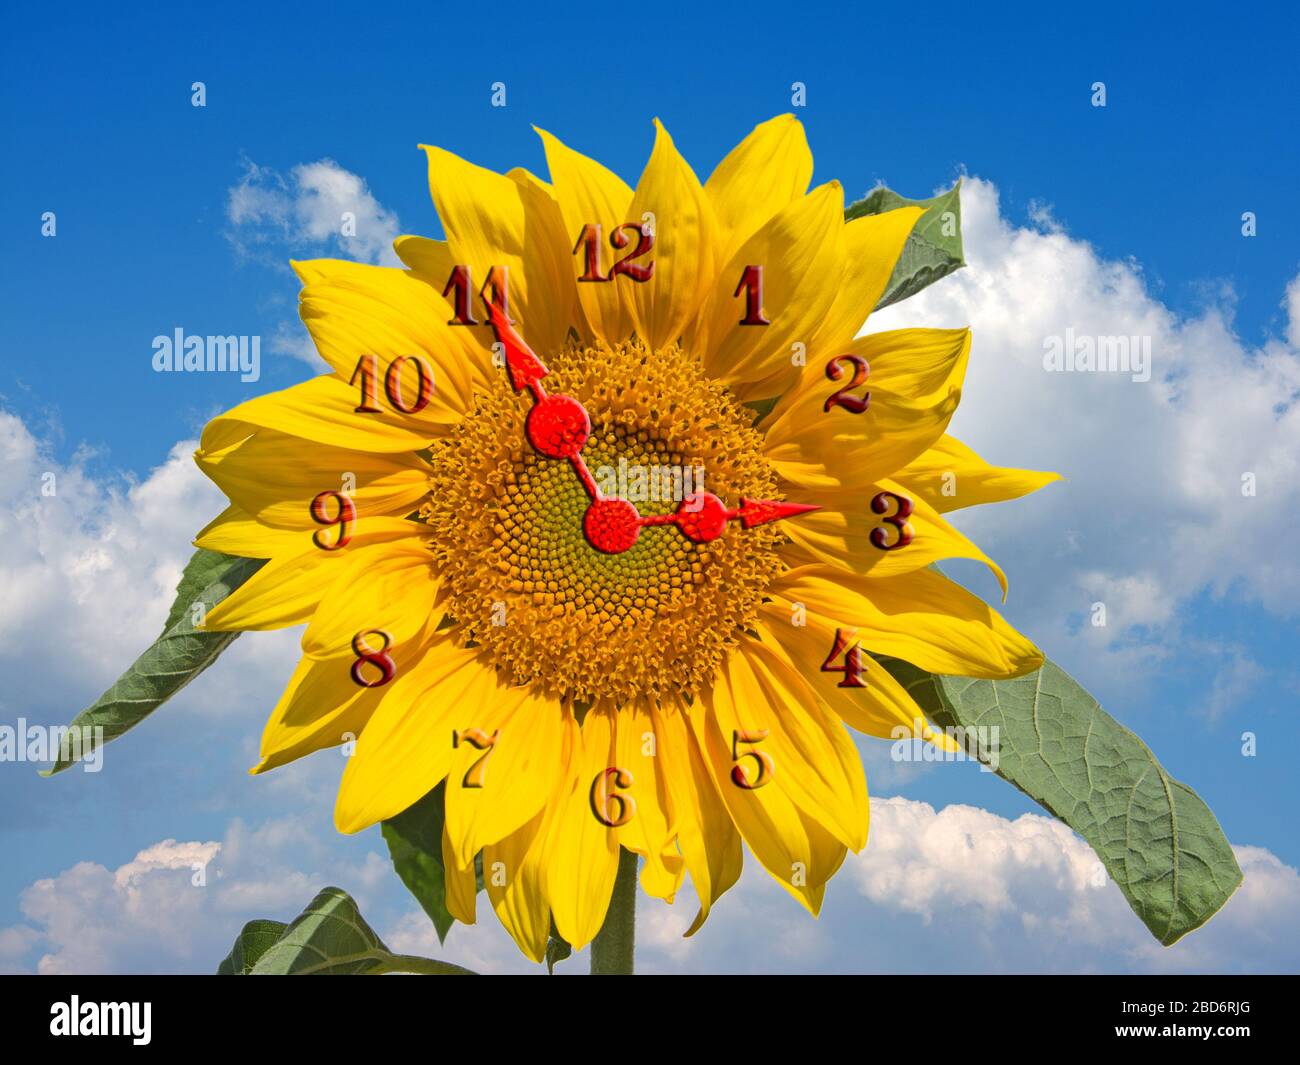 Sunflower with clock in front of cloudy sky Stock Photo